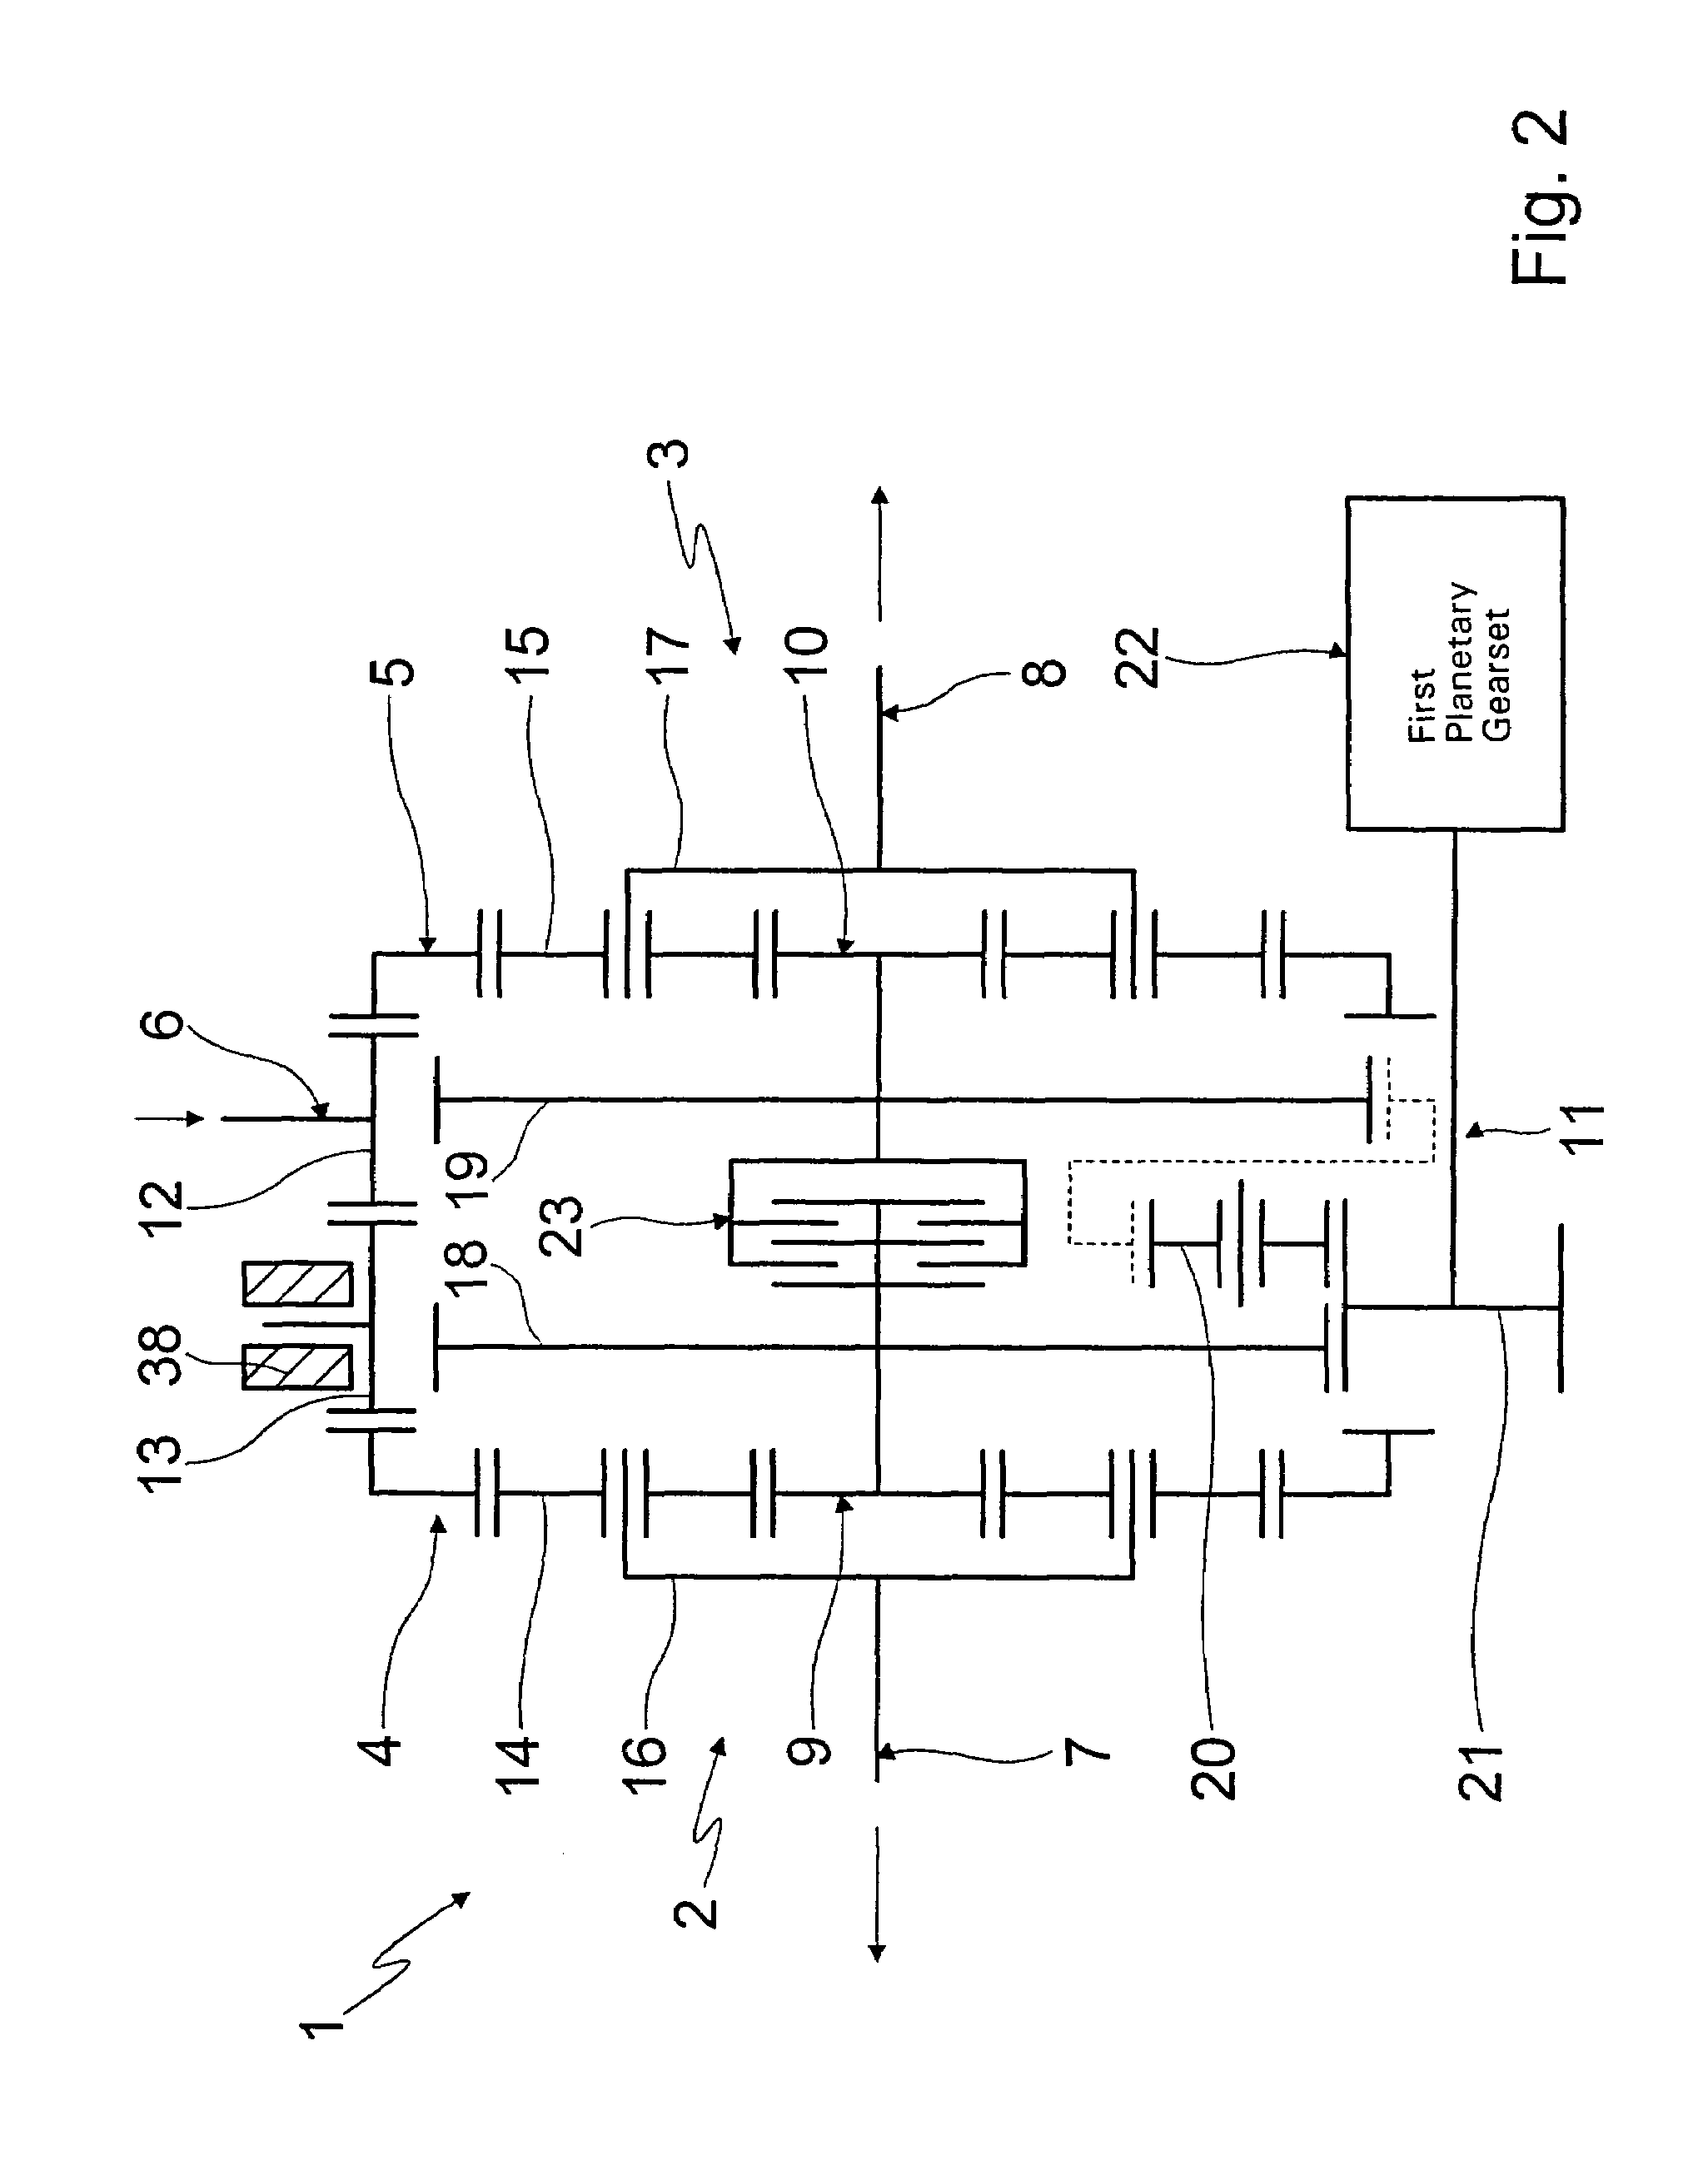 Transmission and drive train for a vehicle